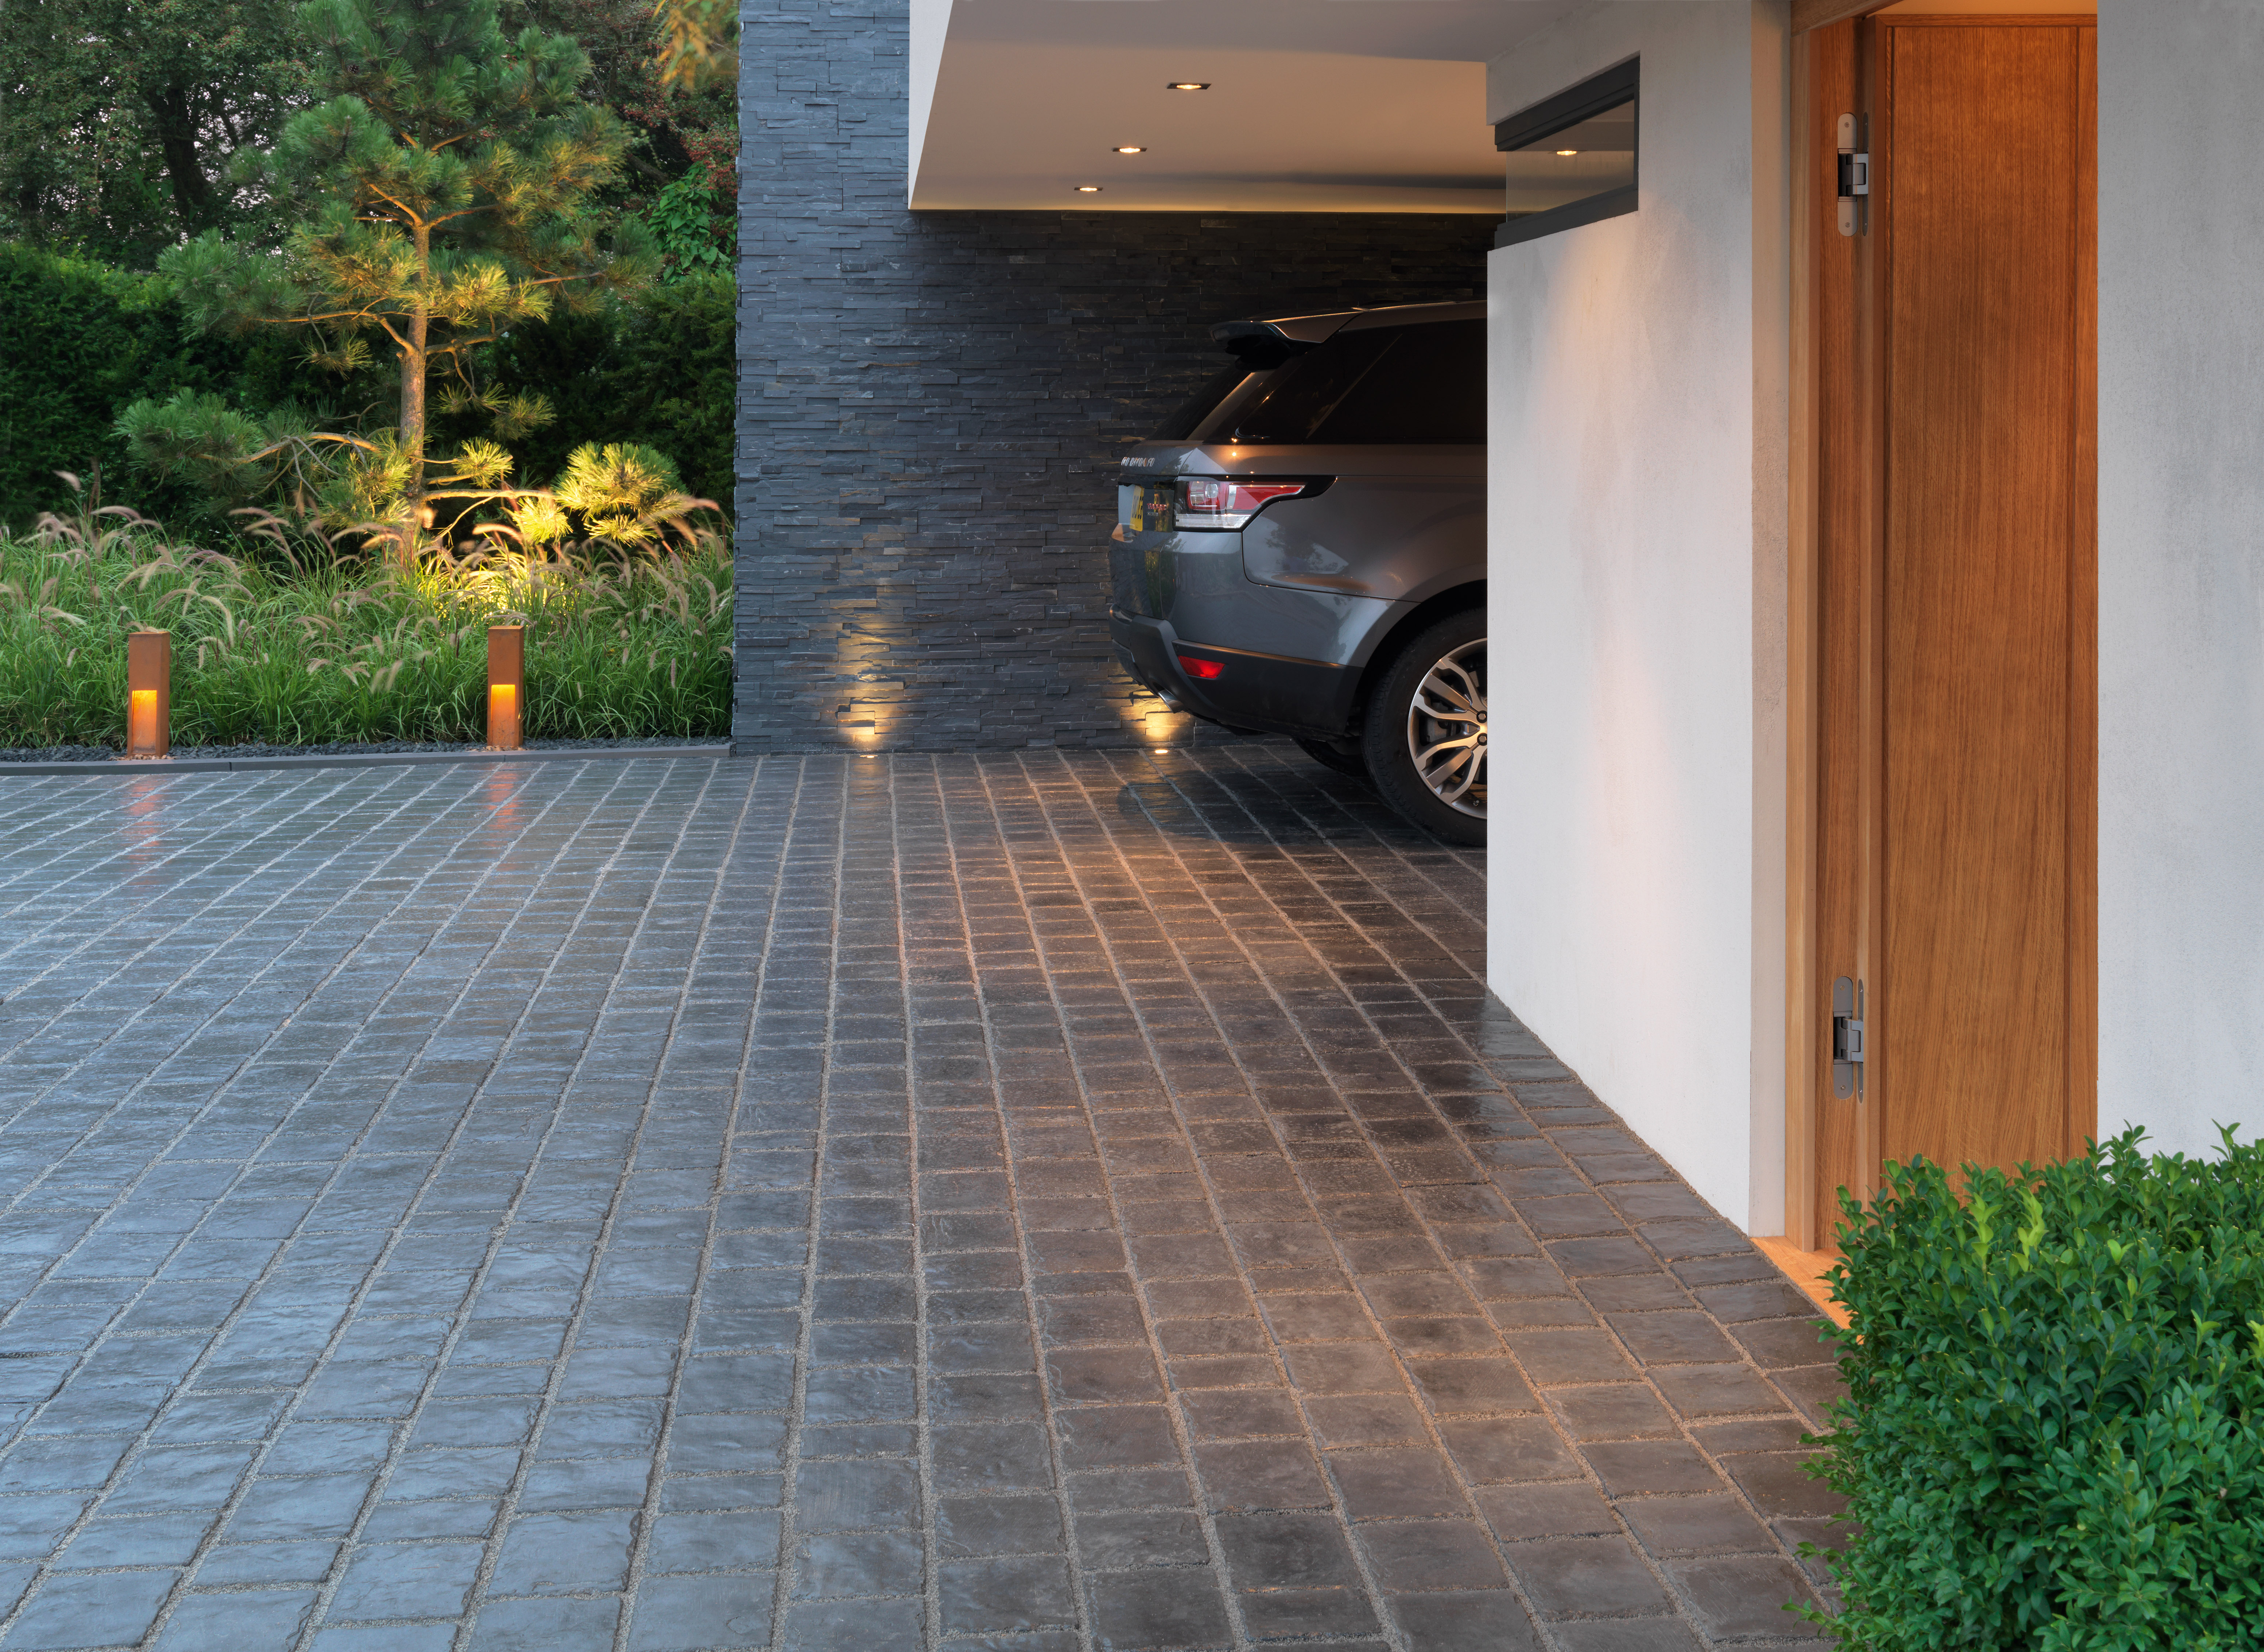 Block paving by Stonemarket in driveway